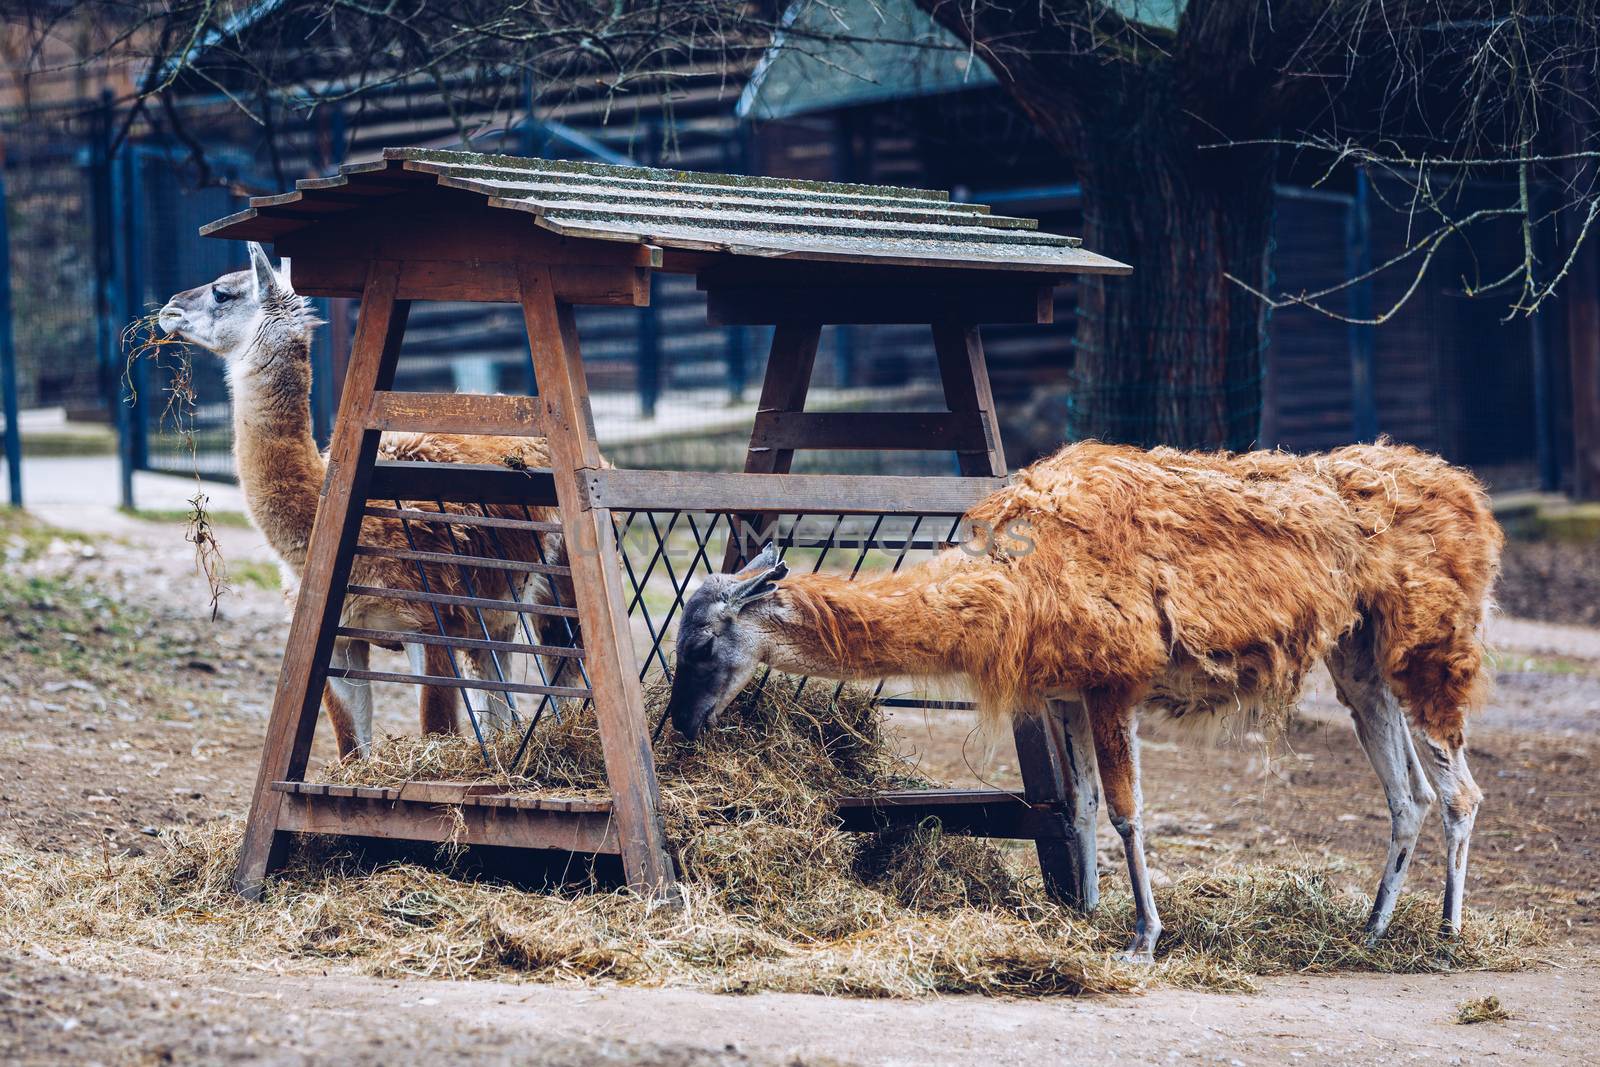 Brown Llamas at Prague Zoo. Alpaca is laying on ground in the zoo of Prague. South American llamas in the zoo aviary at the feeder.